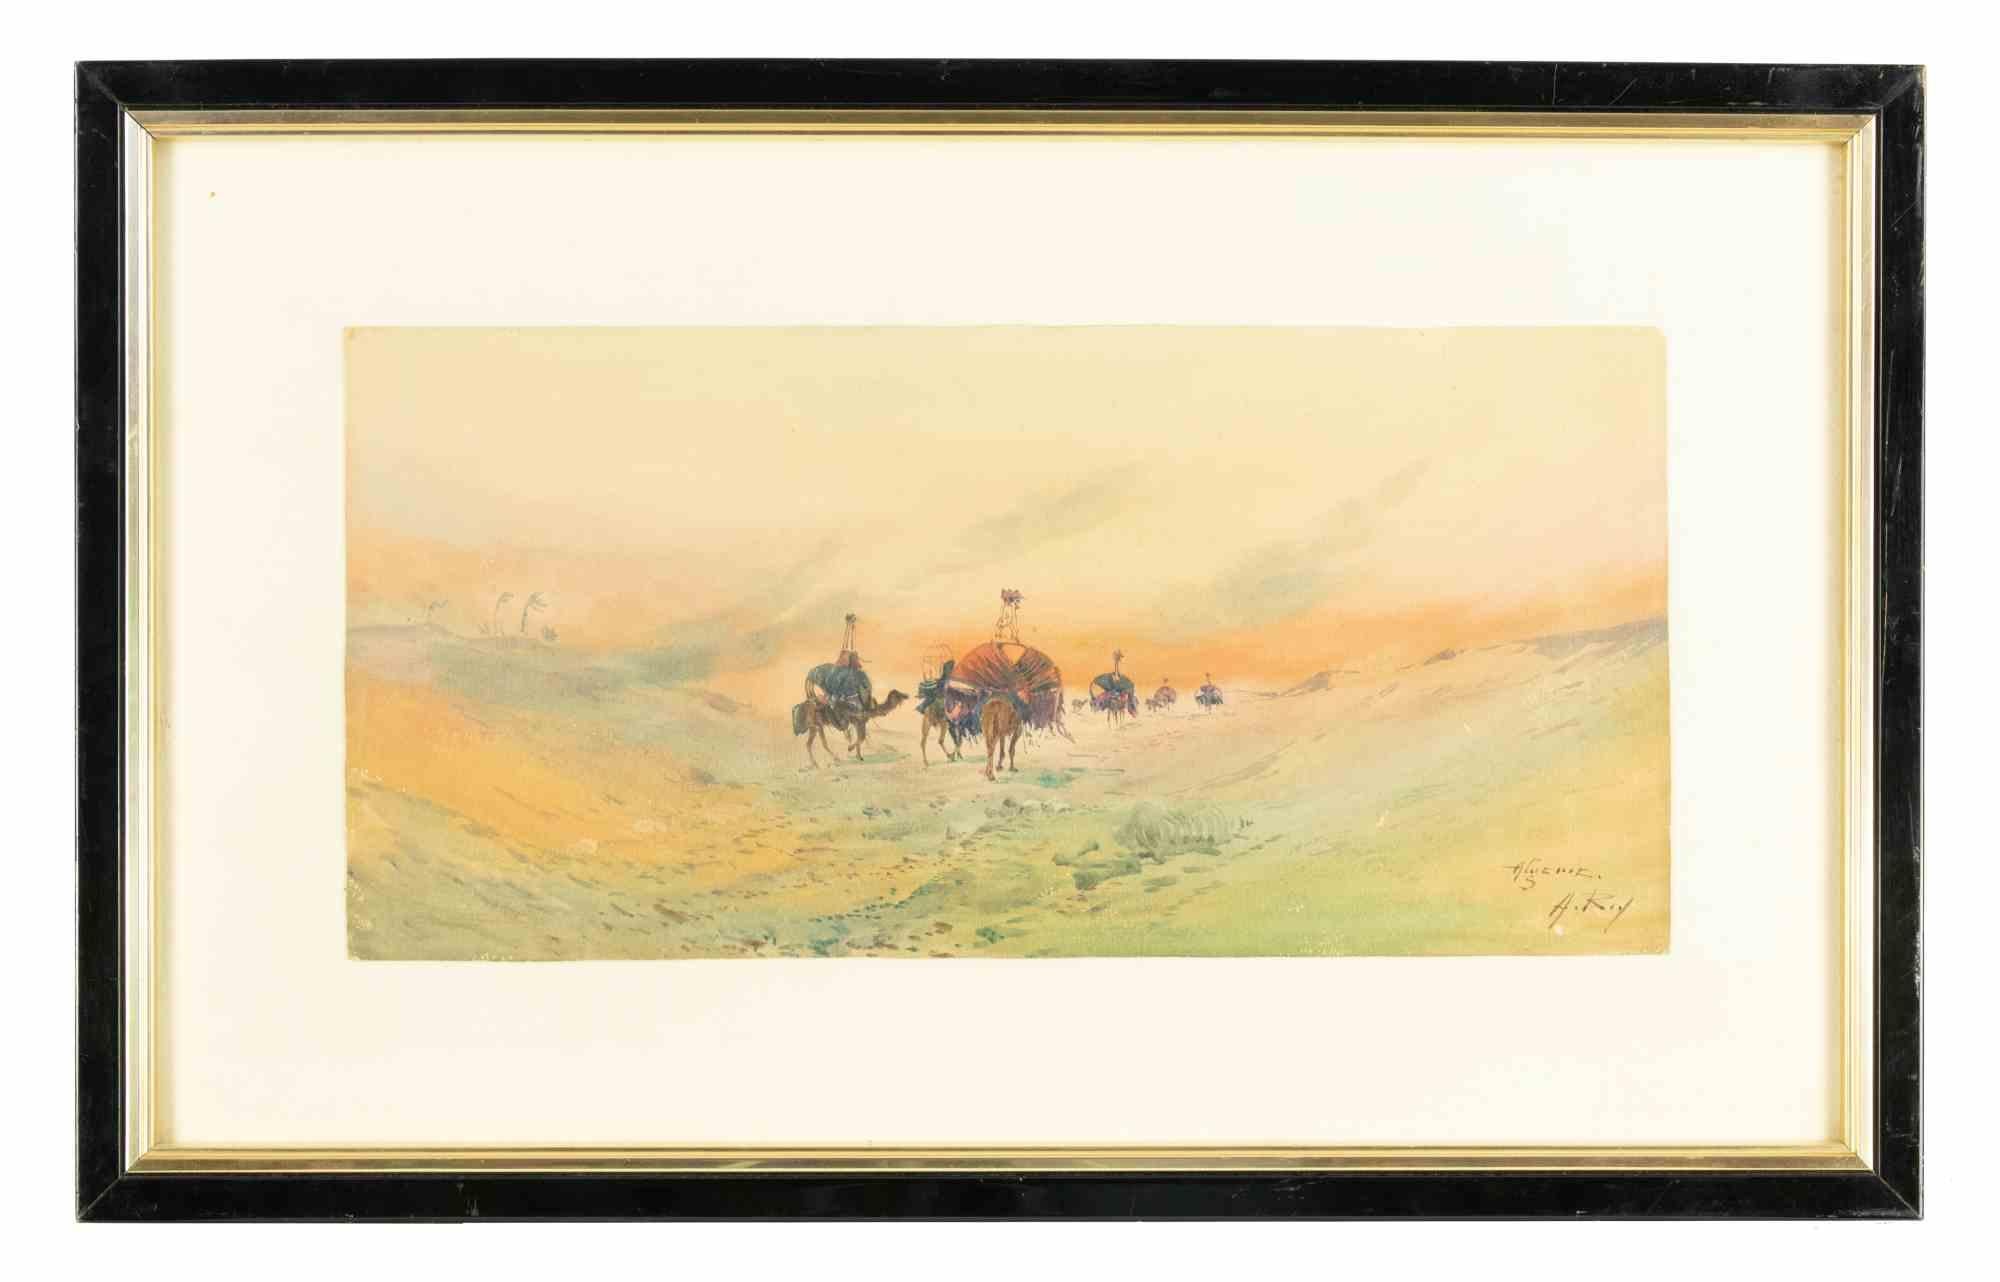 Arabic Desert - Drawing in Ink and Watercolor - Late 20th century - Art by A. Roy